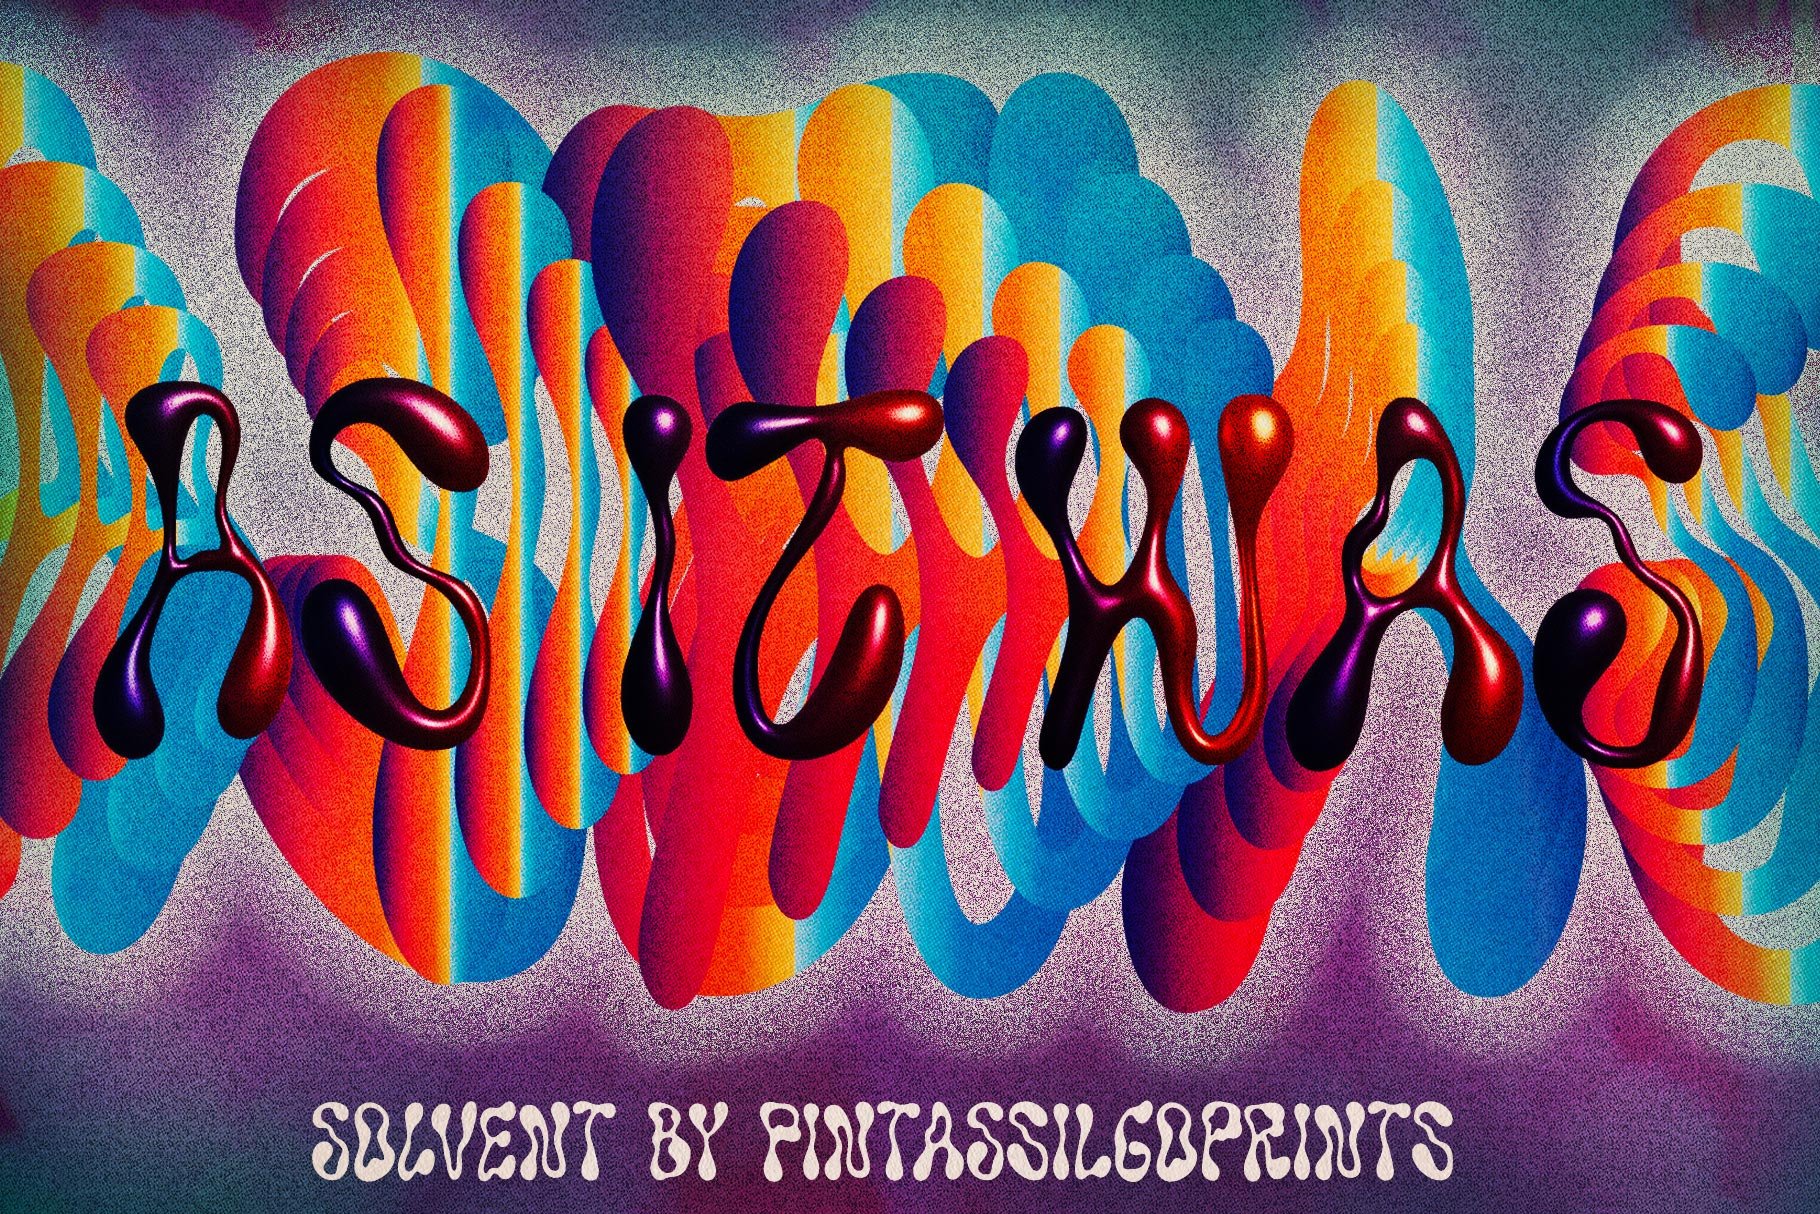 Solvent Family | 2 liquid fonts cover image.